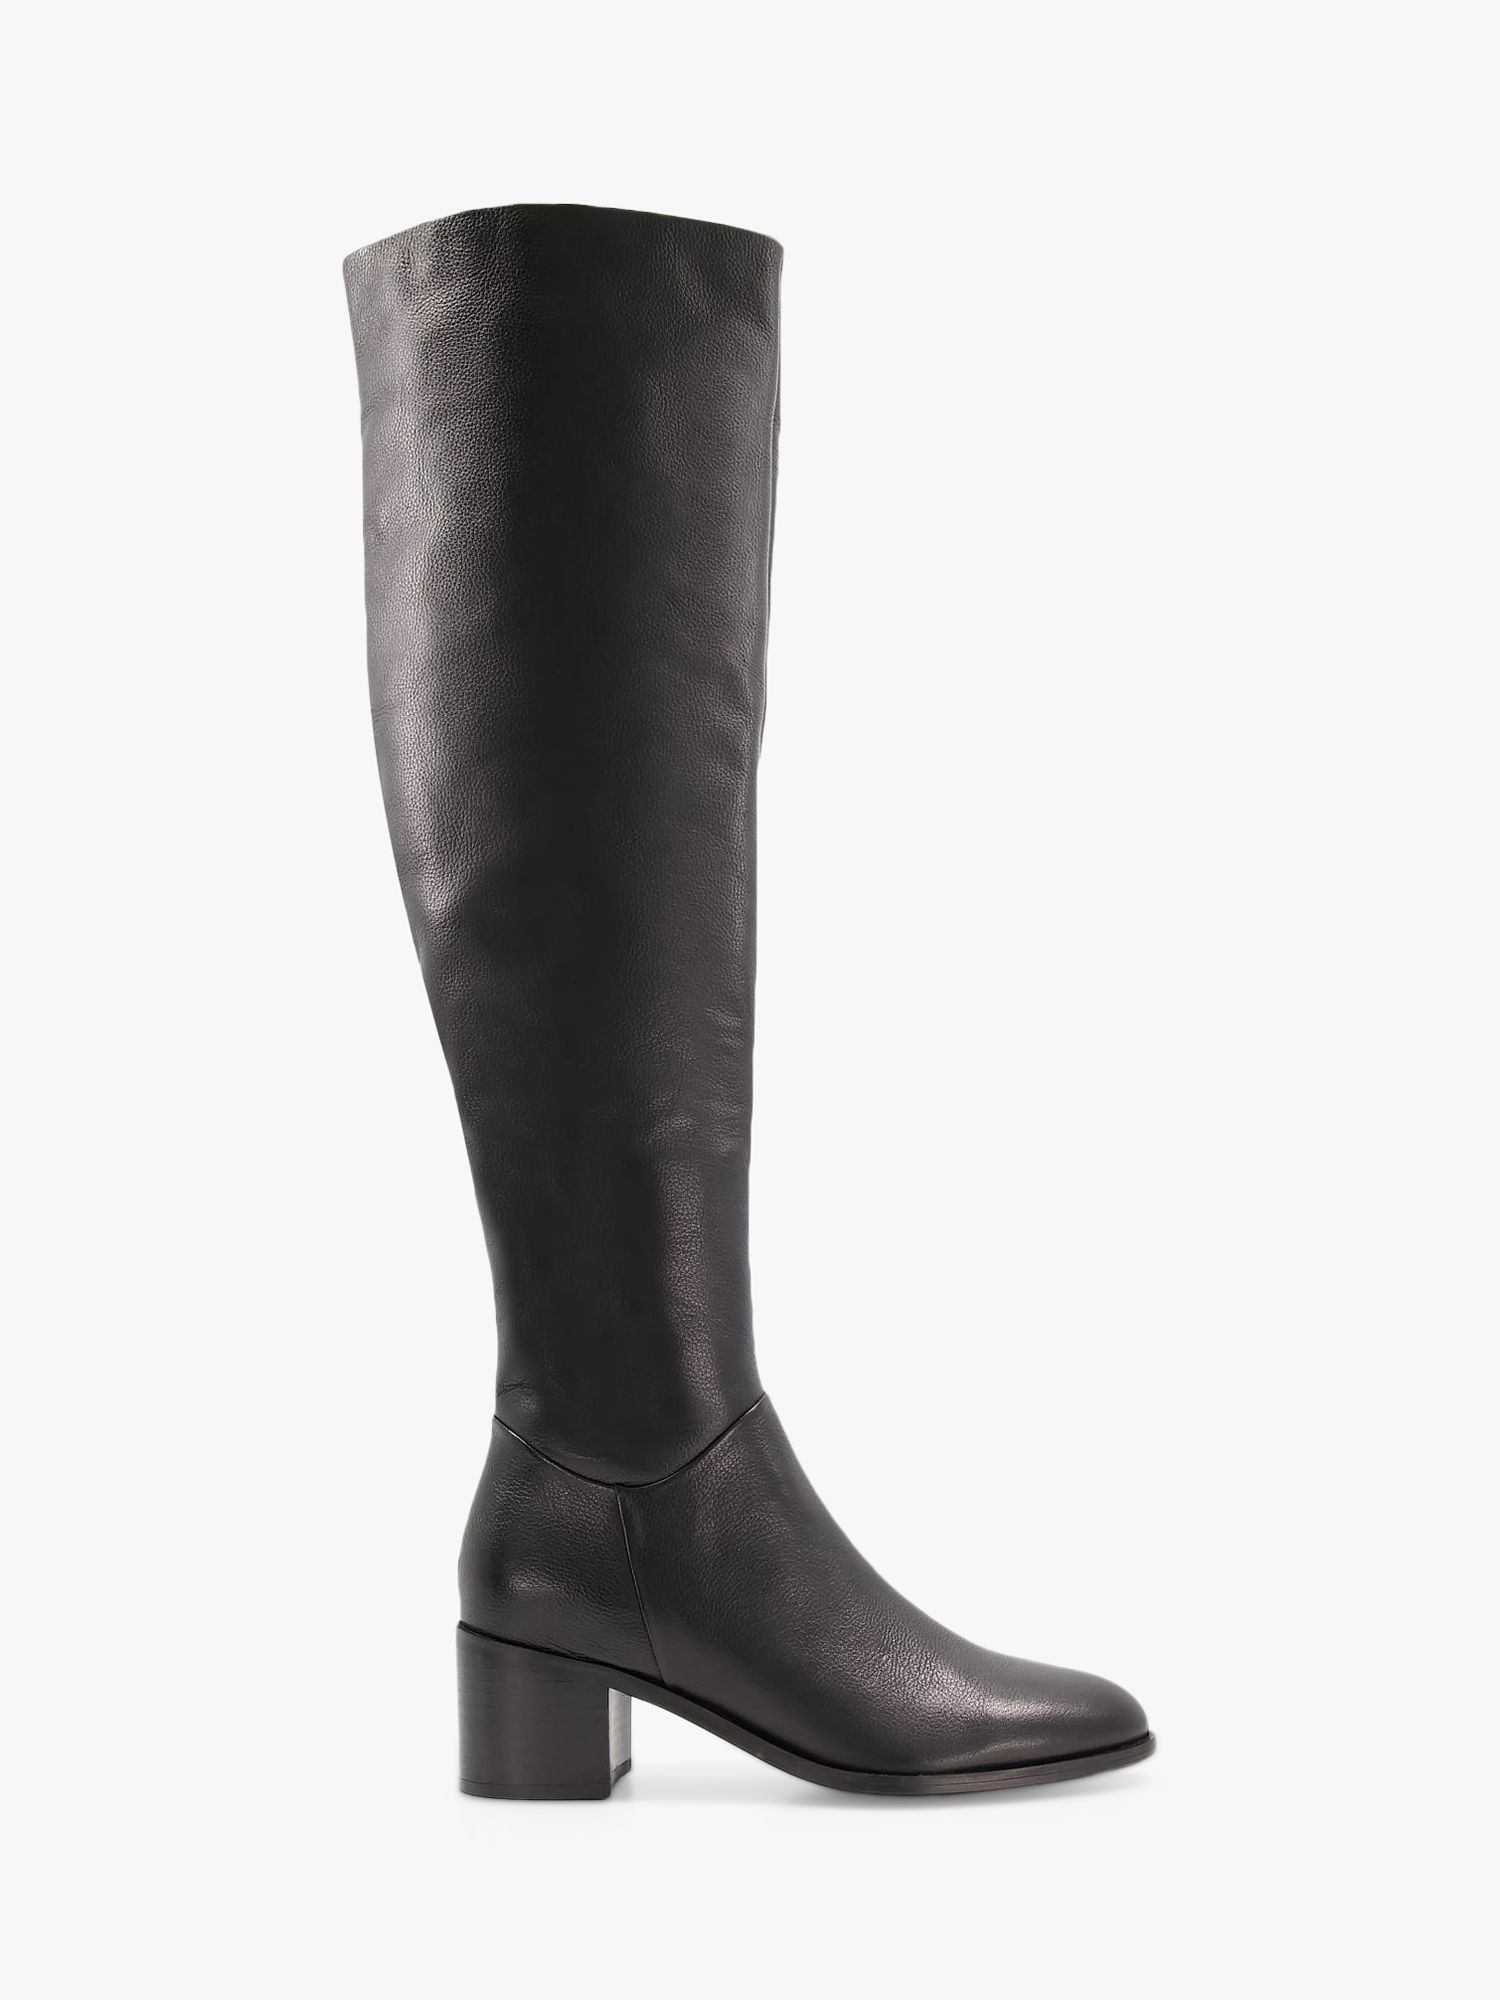 Dune Trinny Leather Knee Boots, Black at John Lewis & Partners